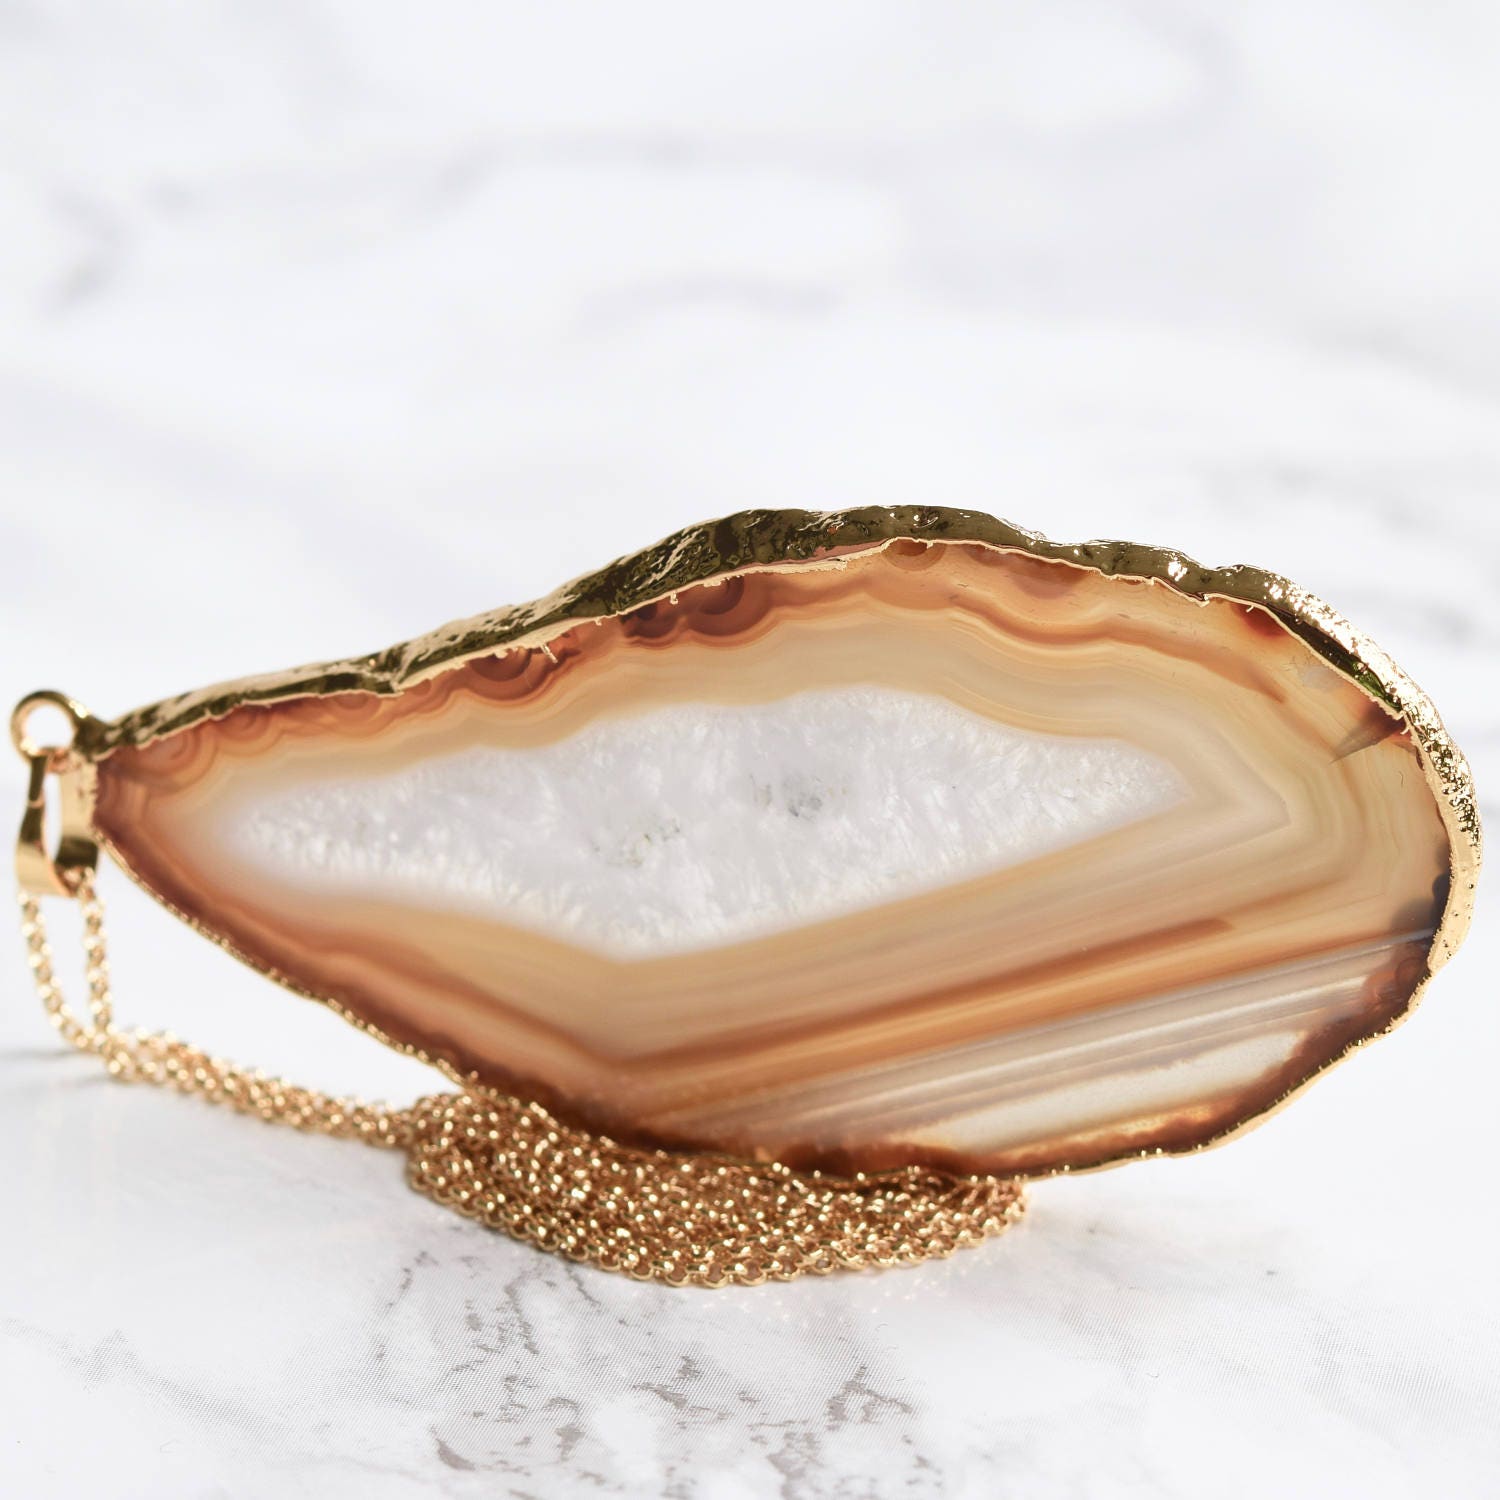 Agate Slice Necklace, Long Gold Necklace, Amber and Gold Pendant Necklace, Gold Layering Necklace, Golden Agate, Amber Agate, One Of A Kind